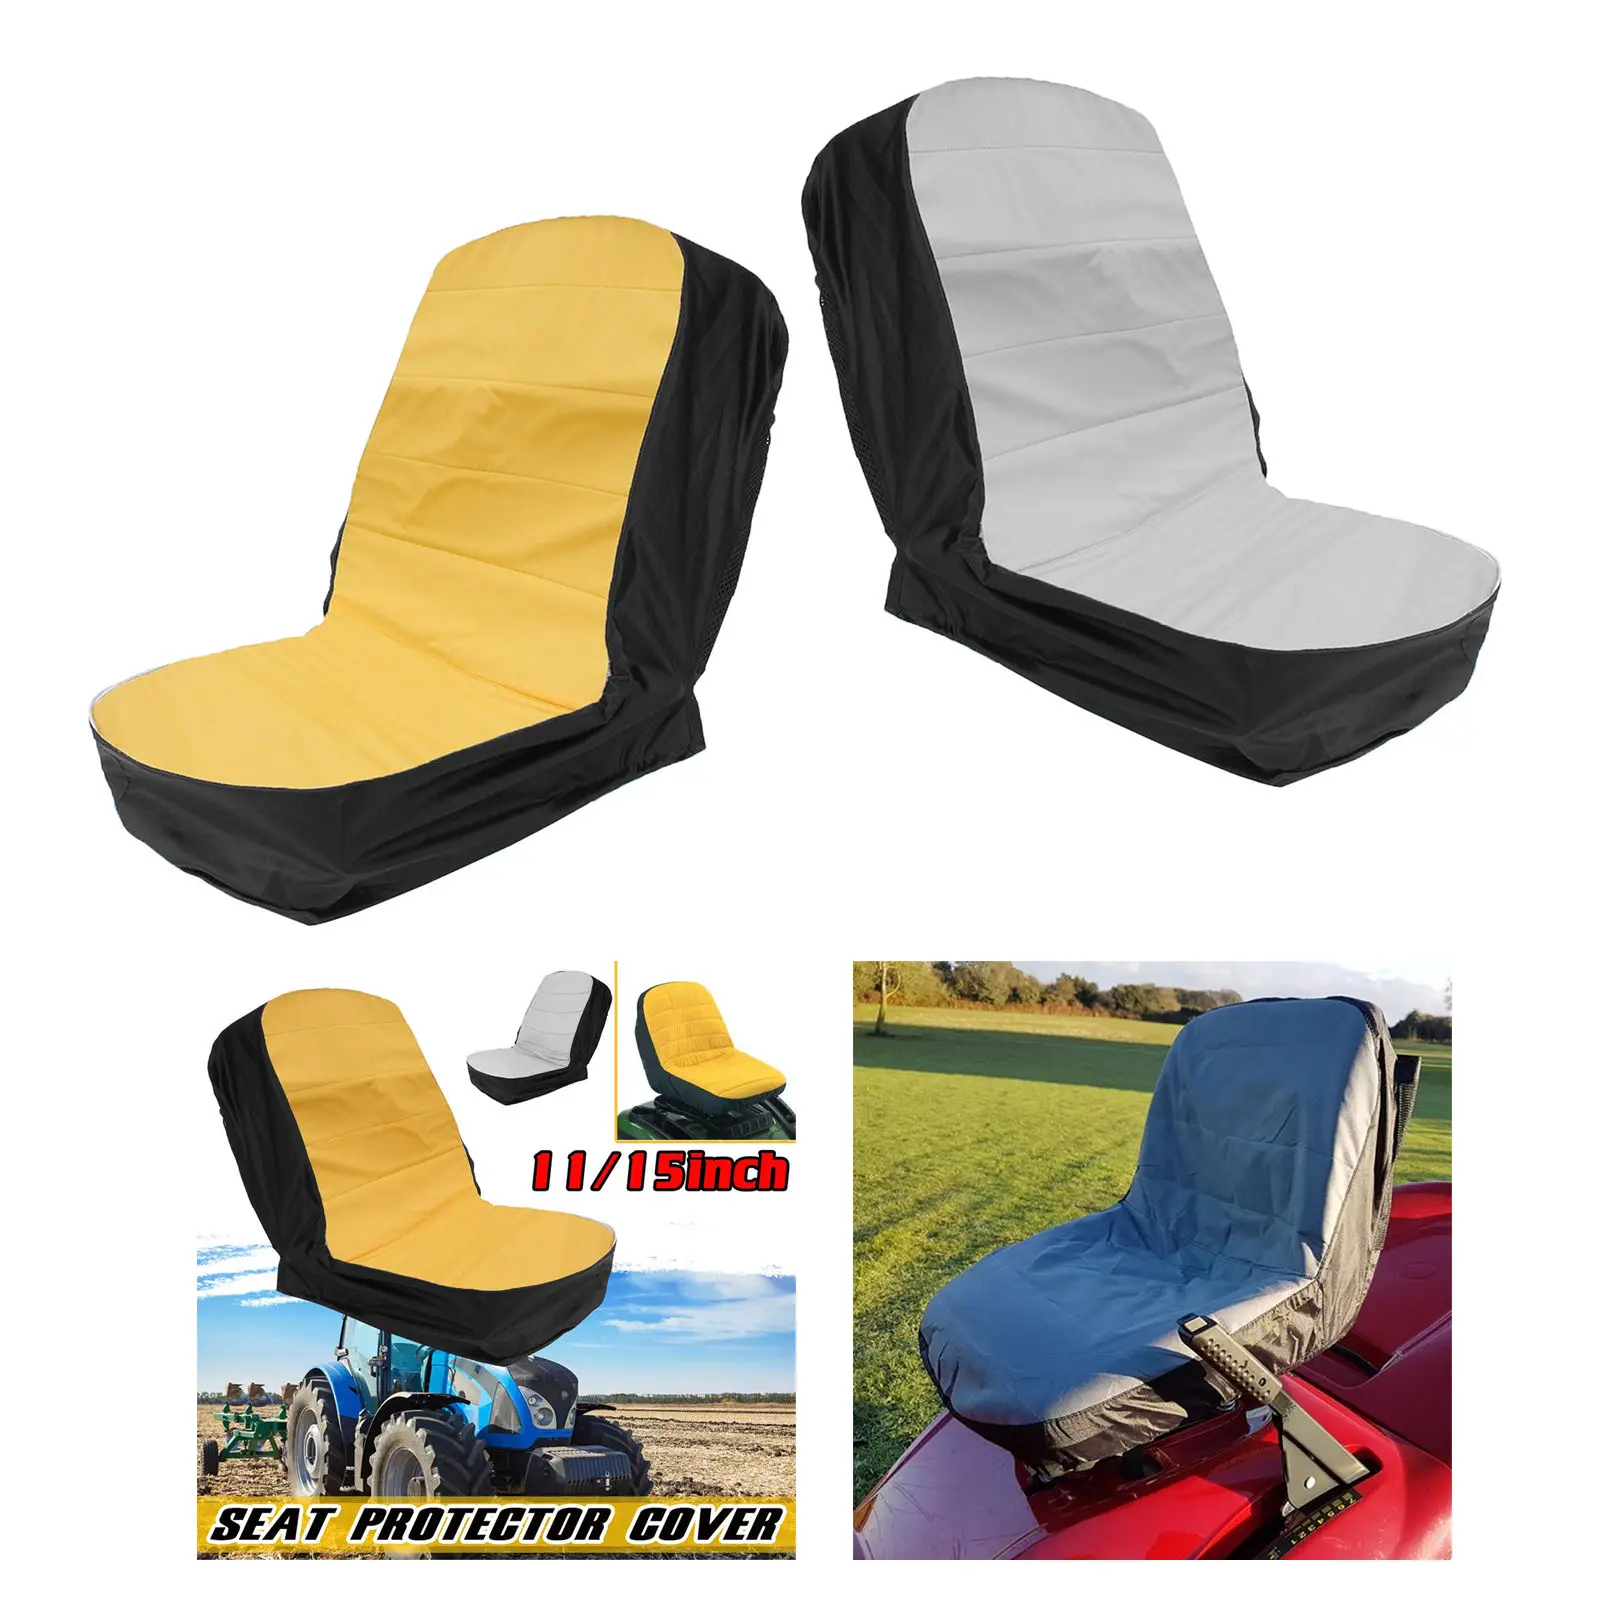 Durable 600D Polyester Oxford Durable Tracto Himal Riding Lawn Mower Seat Cover 